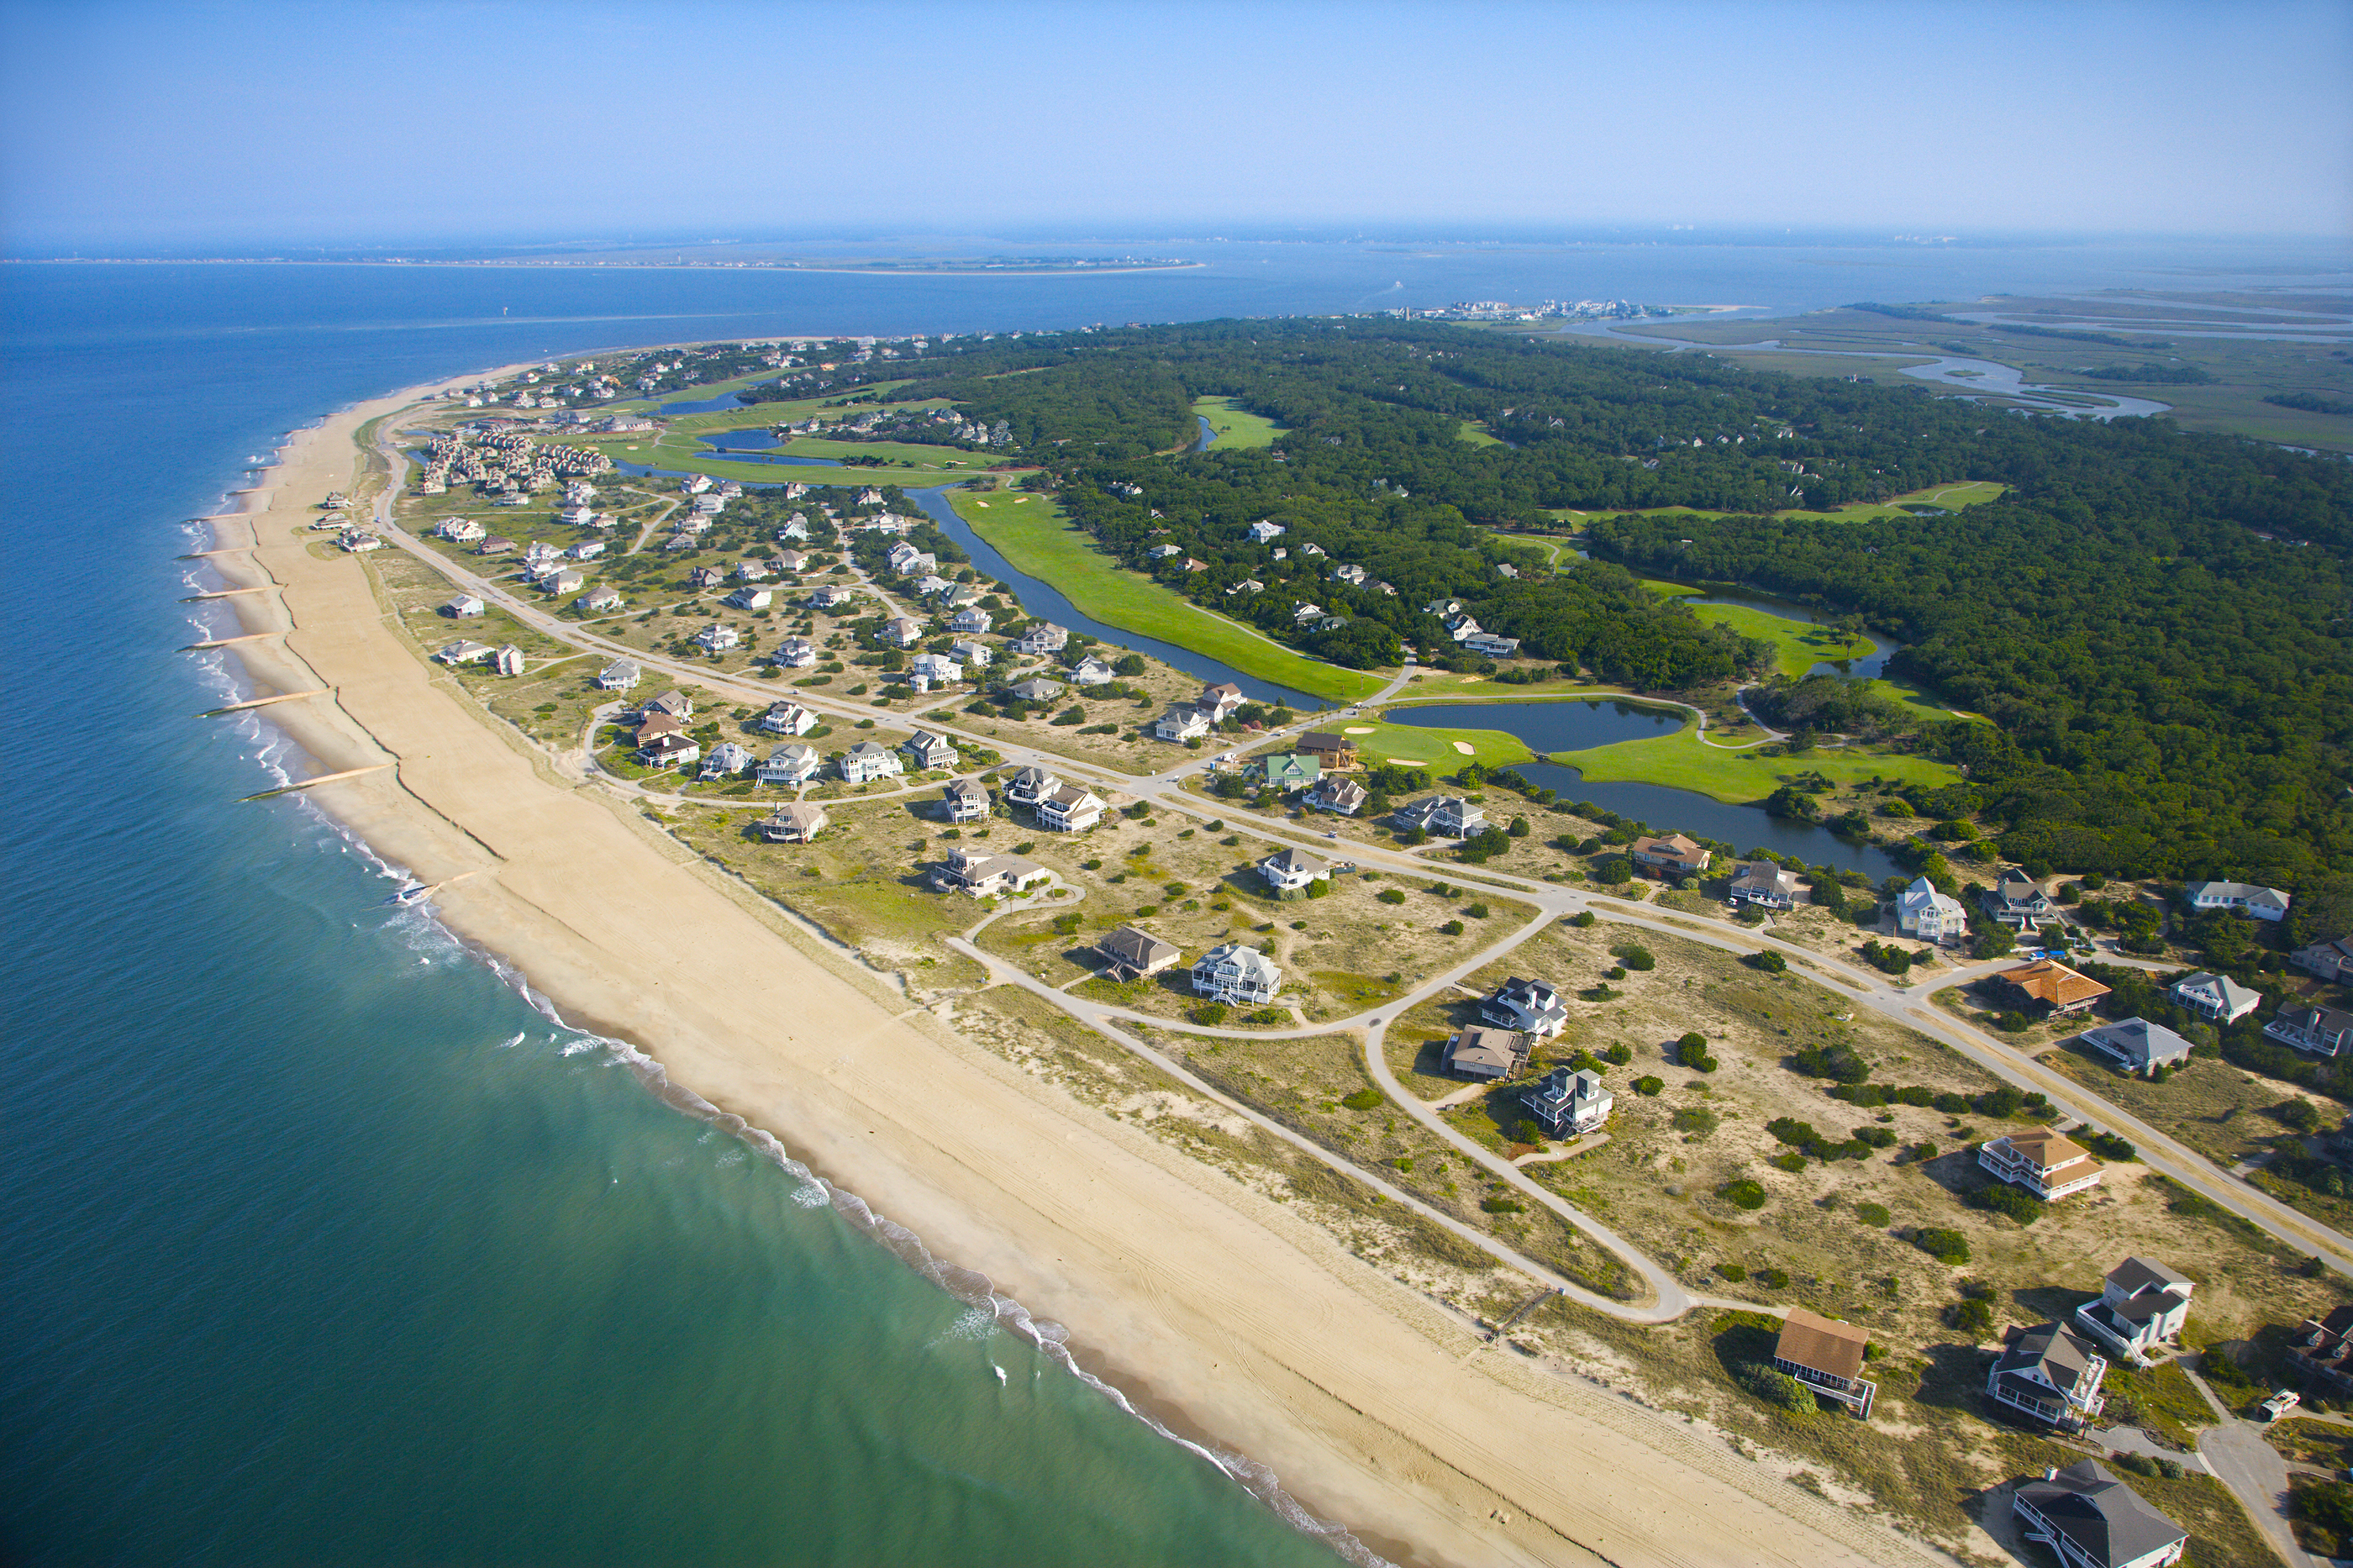 Both Noirth and South Carolina offer many great active adult communities on the beach.